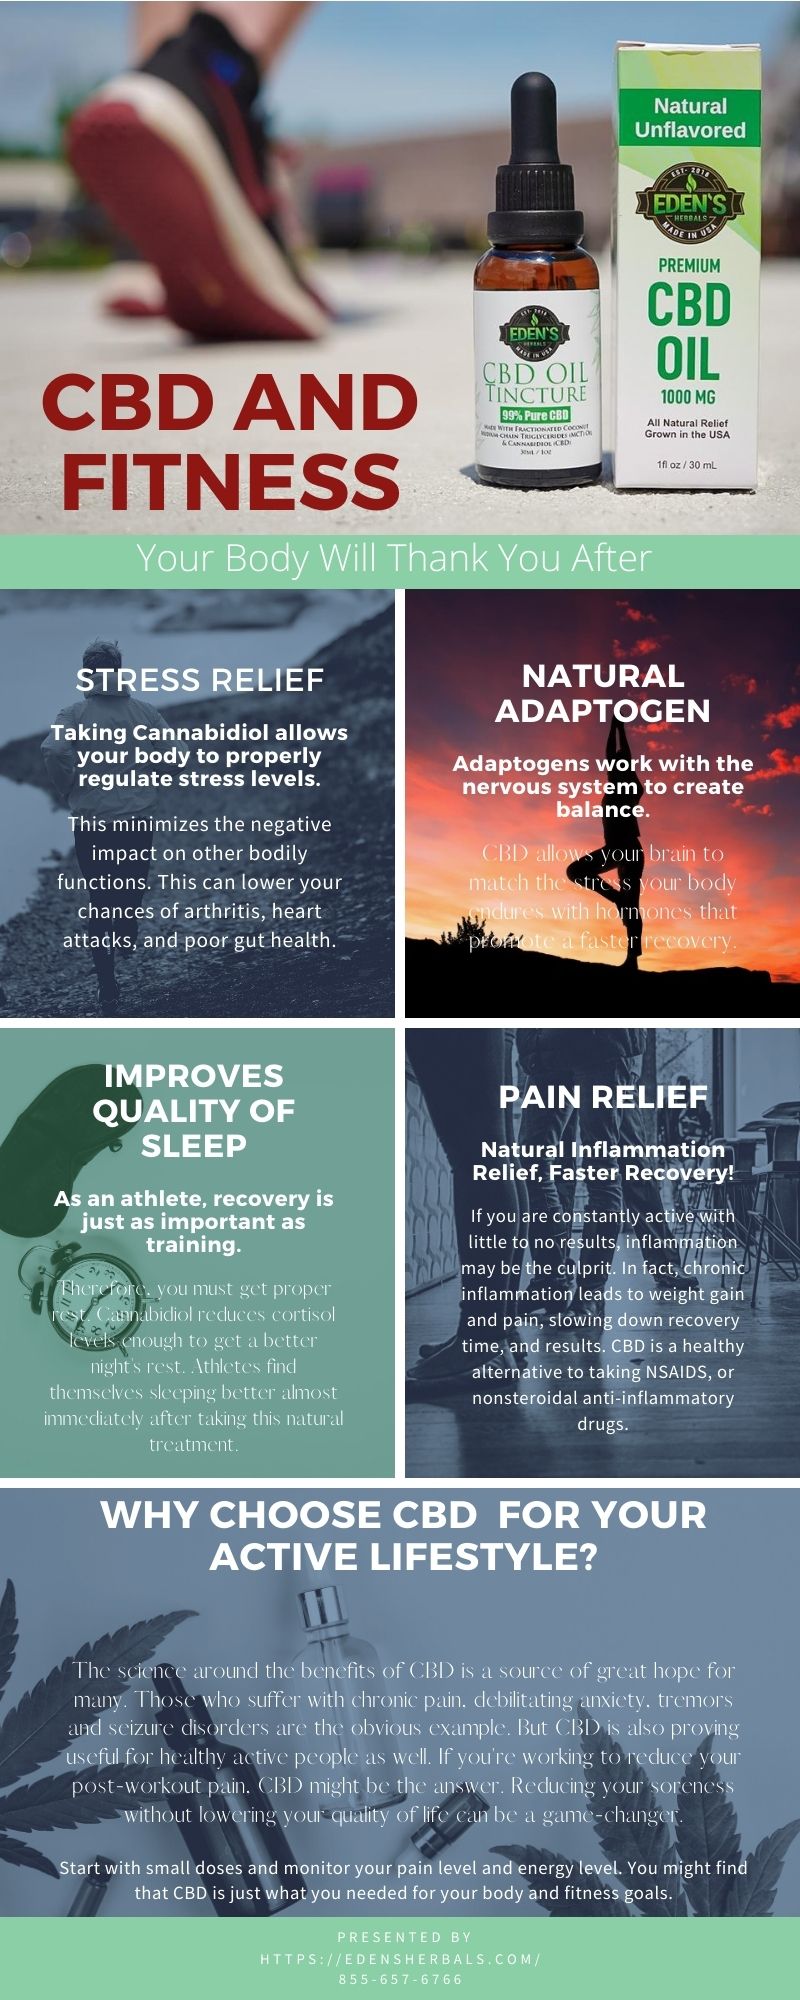 Infographic about the benefits of CBD and fitness